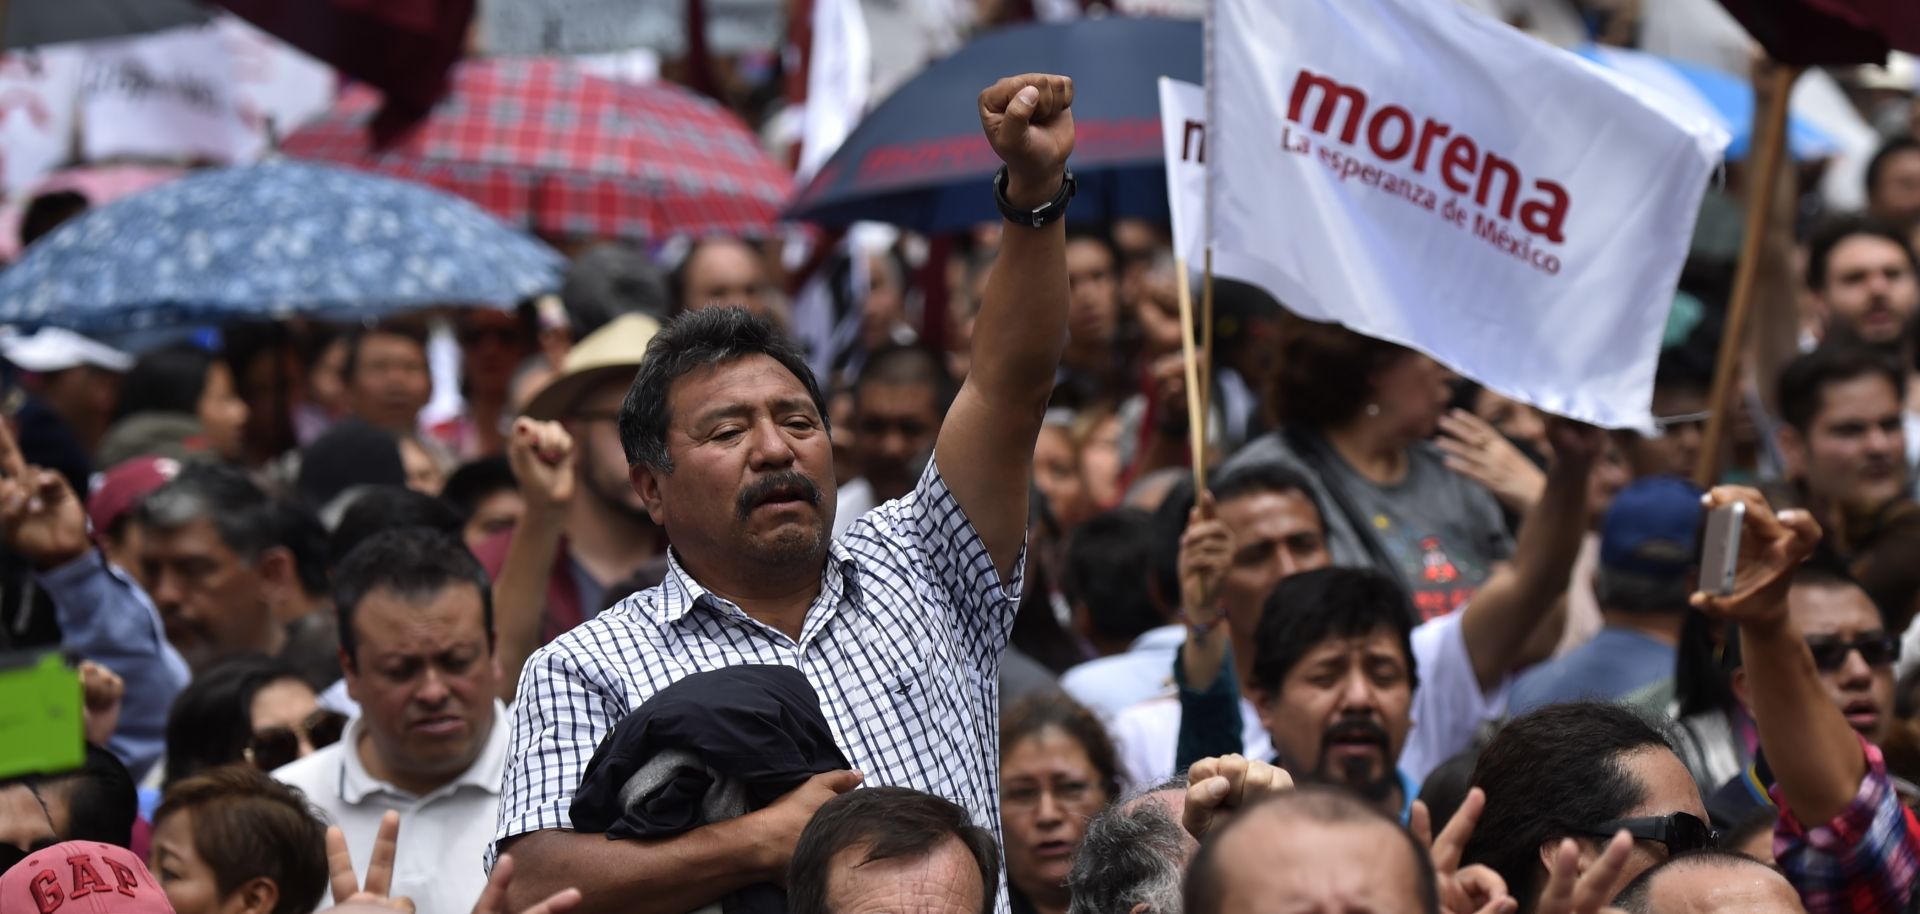 Followers of the National Regeneration Movement (MORENA) attend a speech given by Andres Manuel Lopez Obrador during a rally in Mexico City on Sept. 3, 2017.